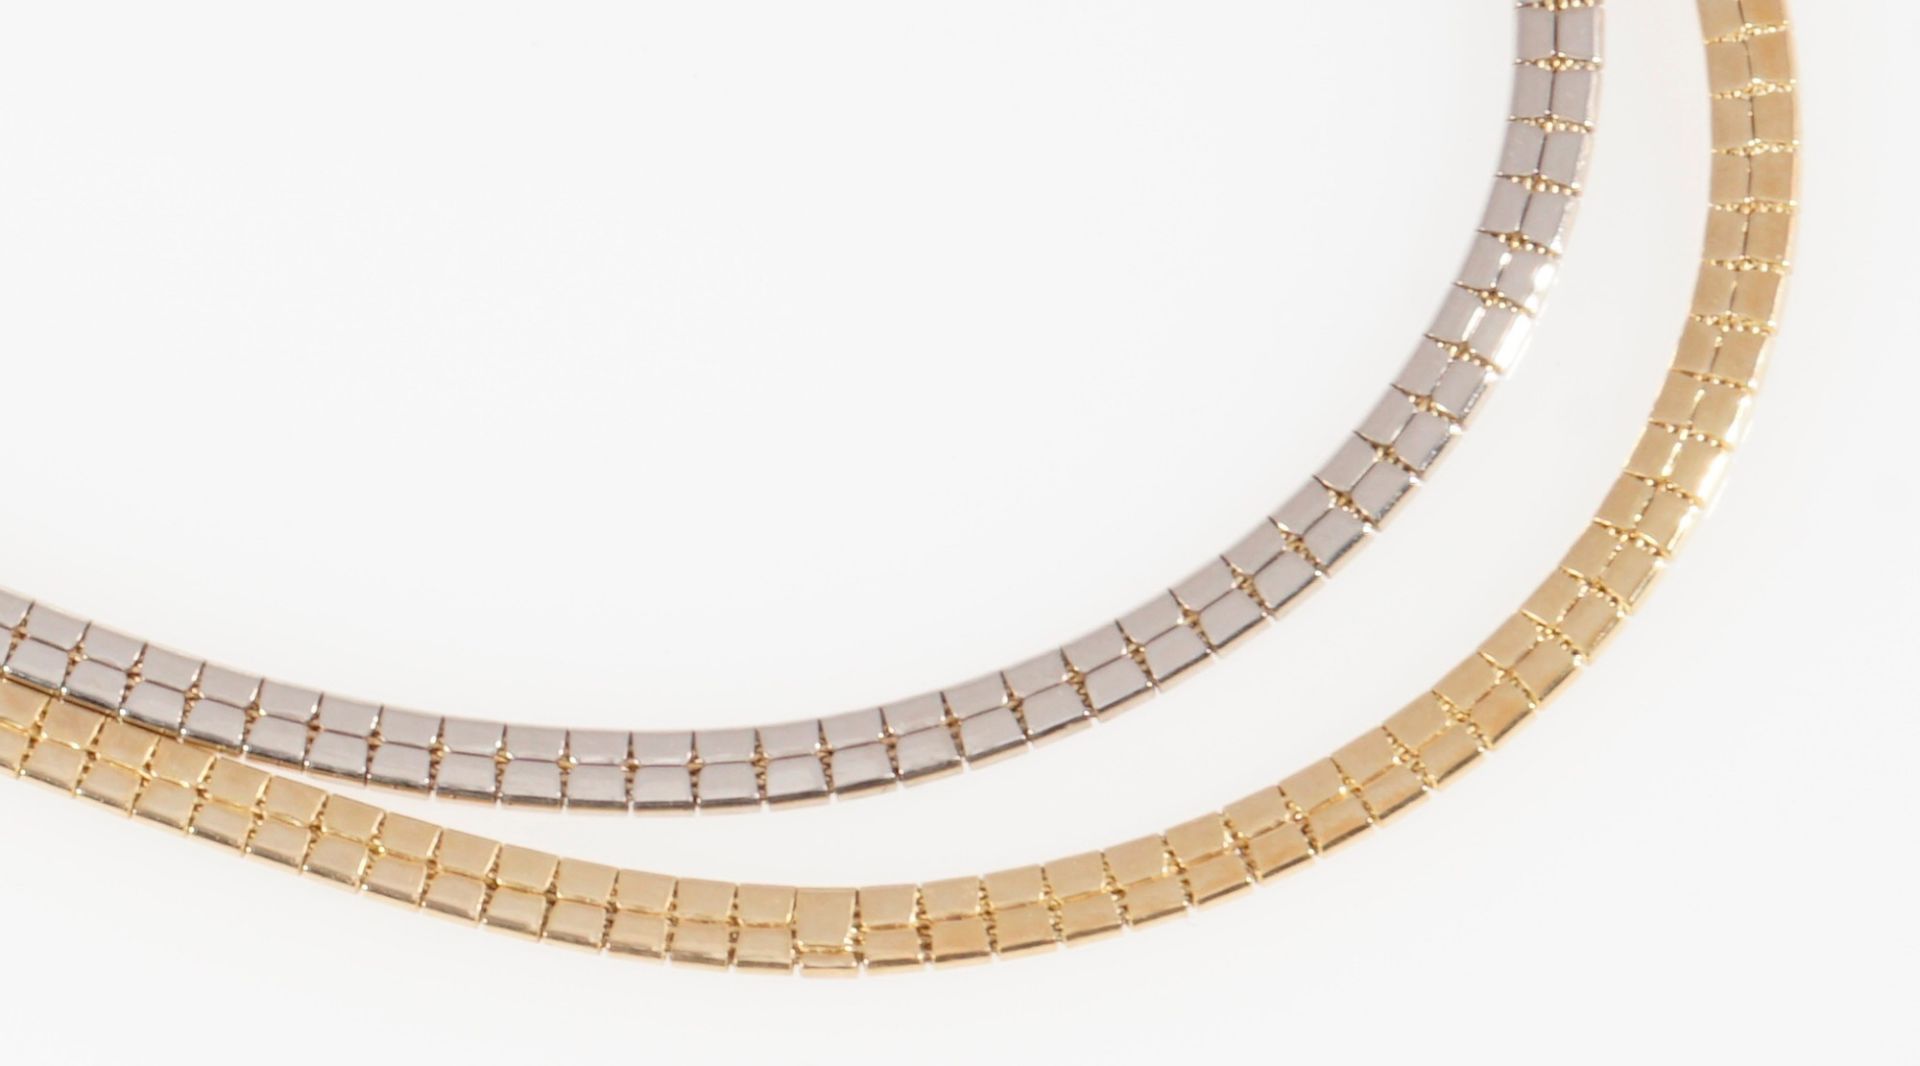 585 two-rowed gold necklace, 14K Gold Collier / zweireihige Halskette, - Image 4 of 5